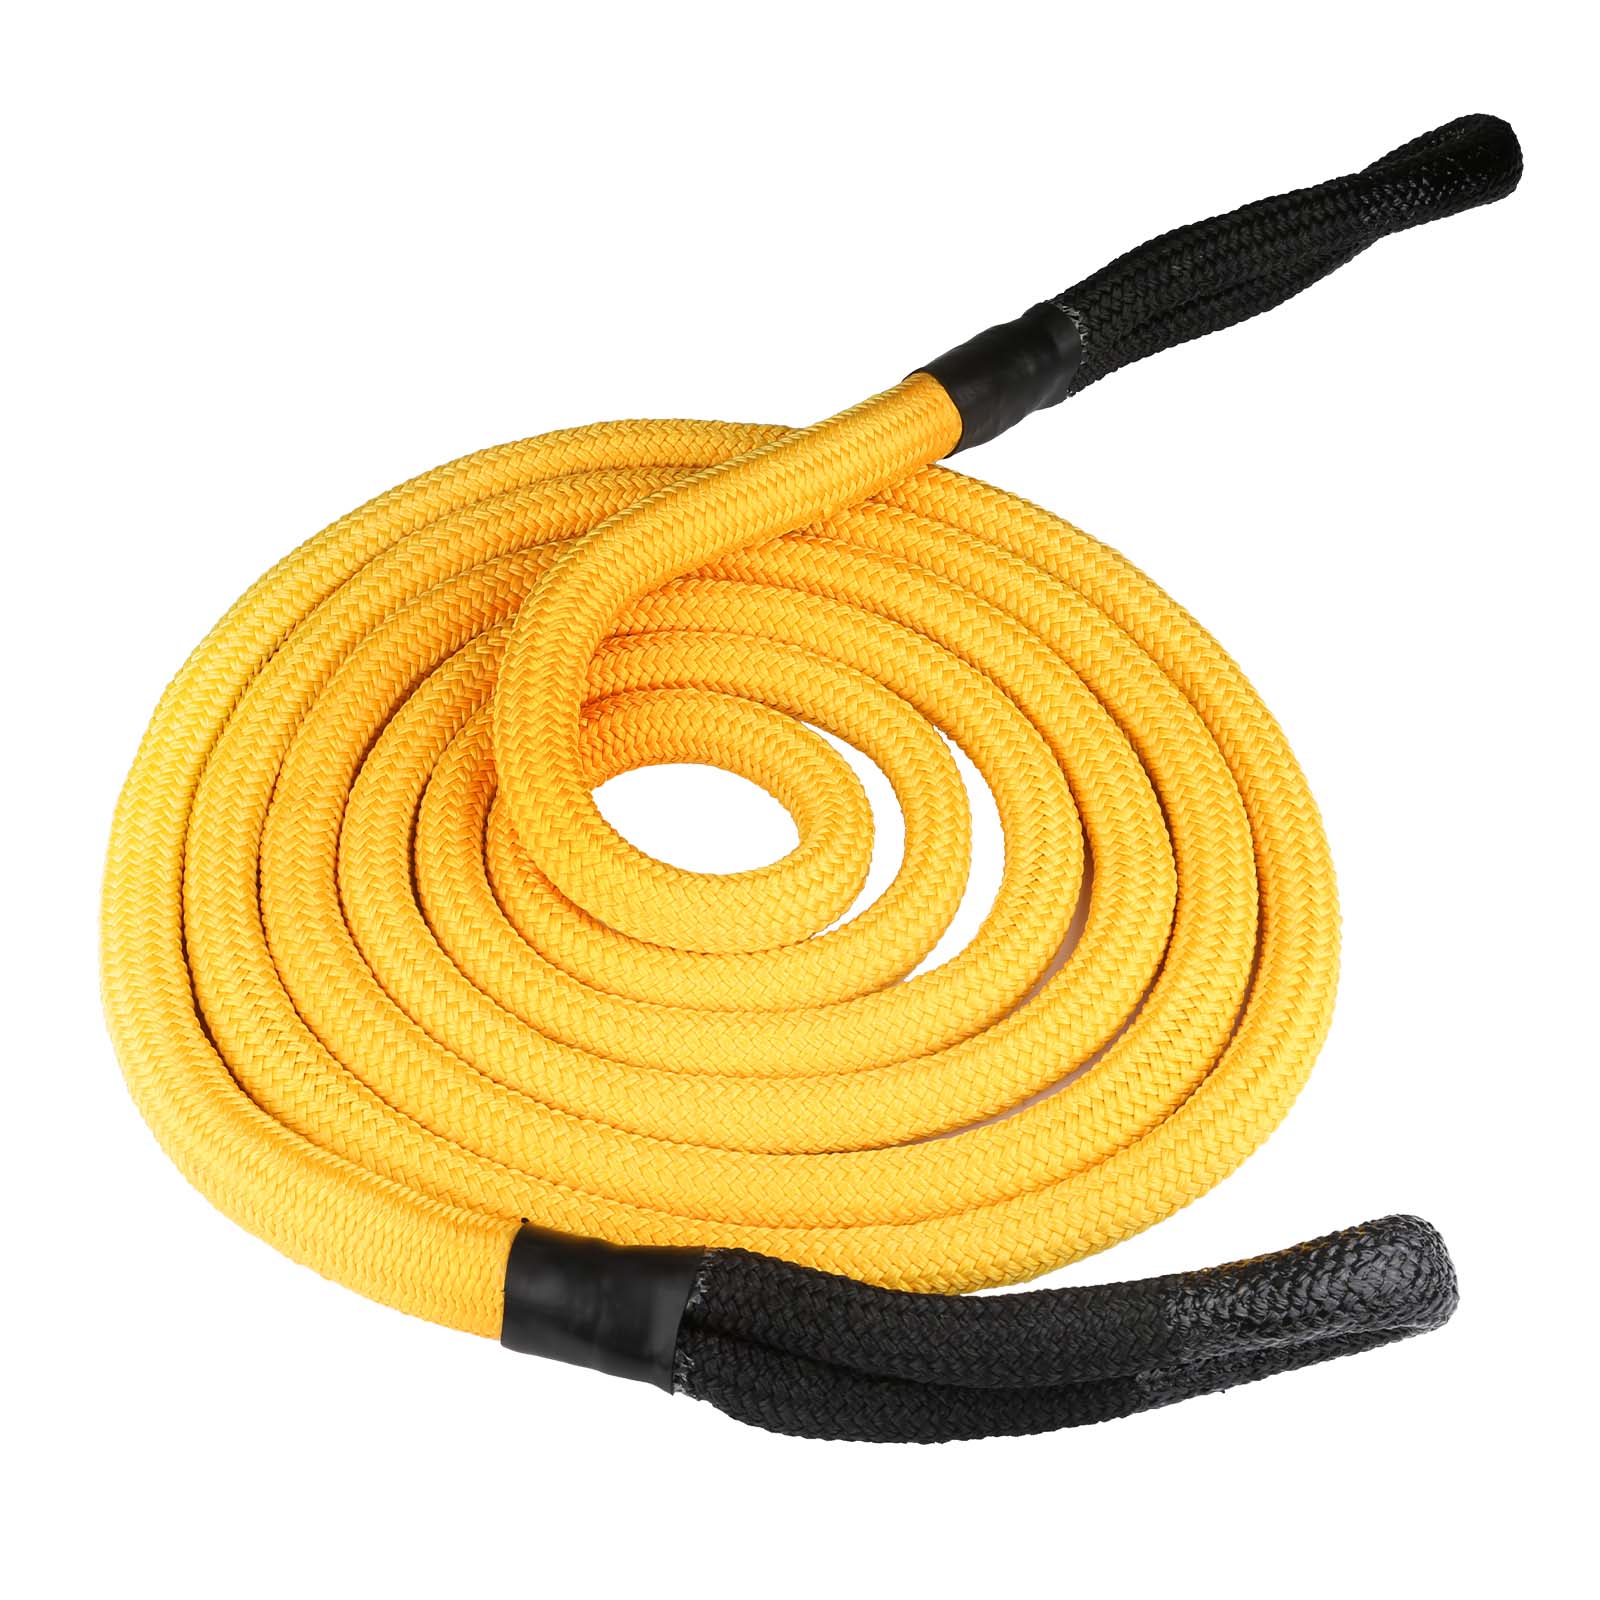 GODIAG Kinetic Recovery Tow Rope 14Tons Pulling Force 20ft/6M 2.5CM  Diameter with 2 Soft Shackles fo